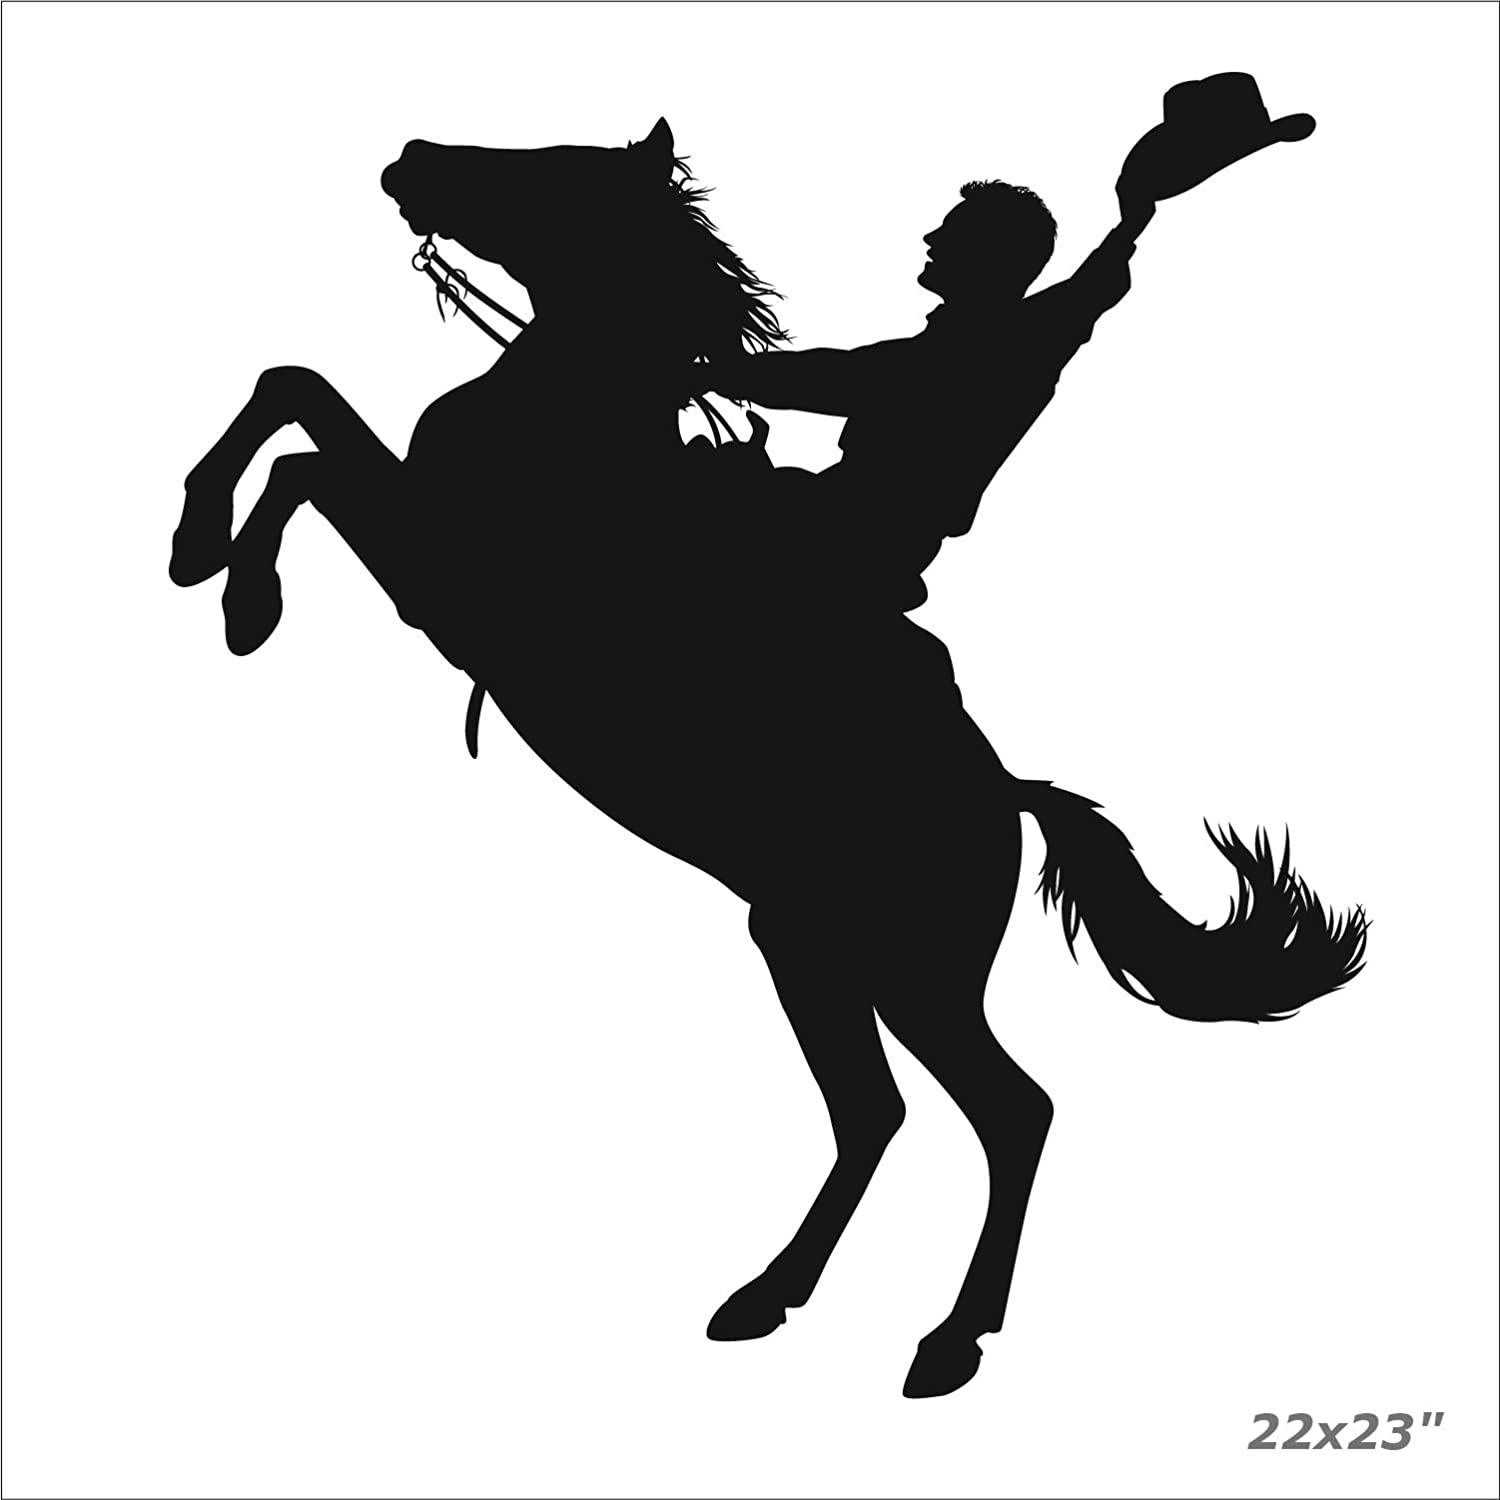 Detail Silhouette Of Cowboy Nomer 26